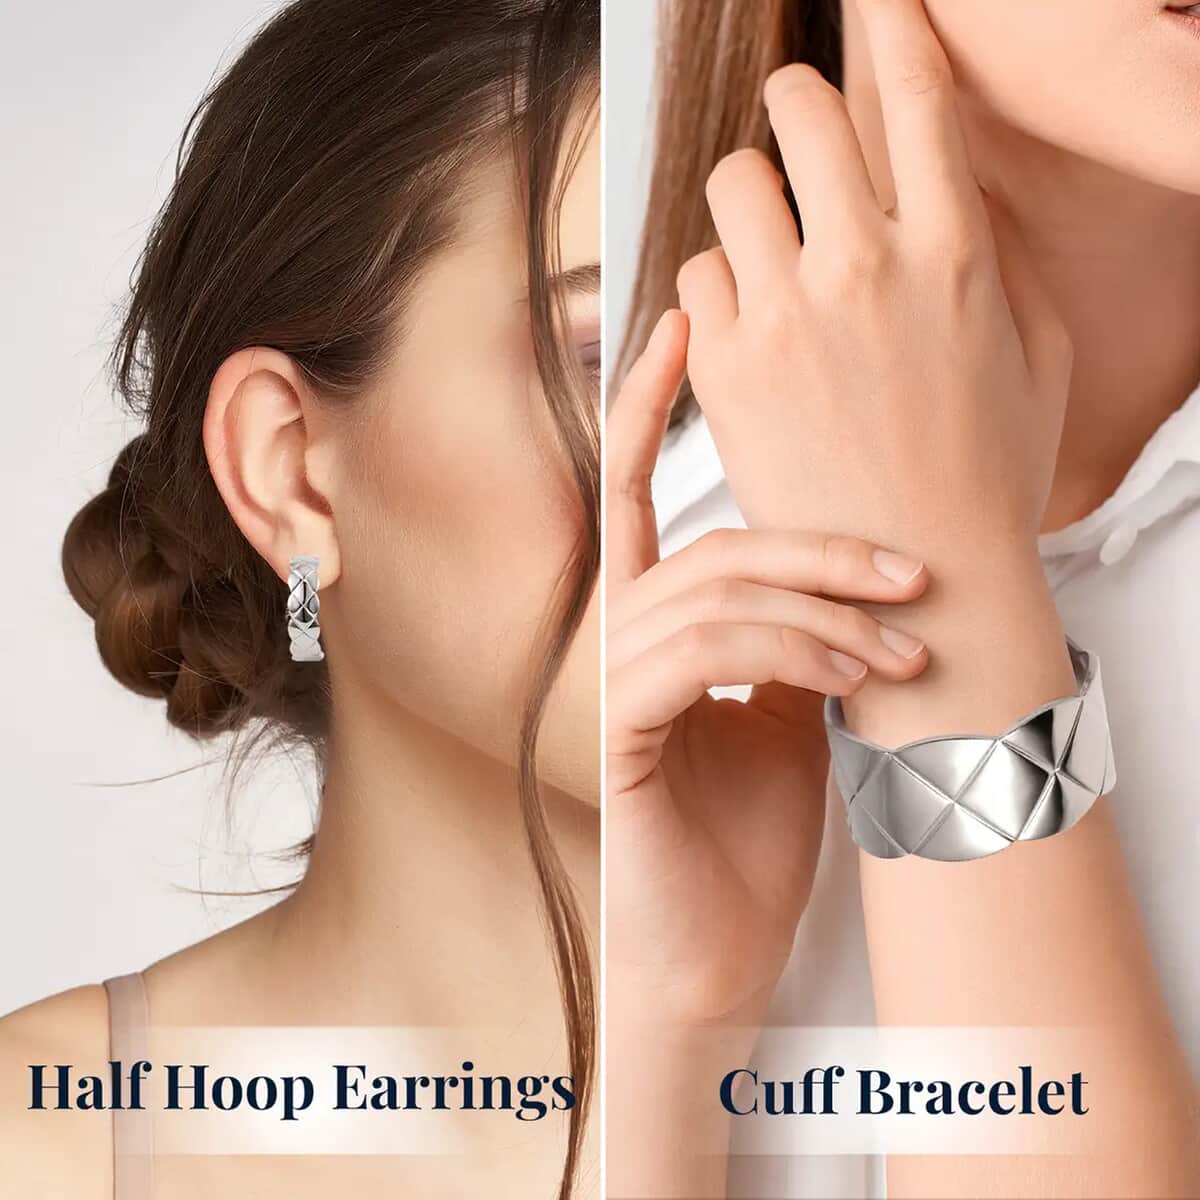 Ever True Diamond-cut Cuff Bracelet (7.0 In) and Half Hoop Earrings in Stainless Steel, Jewelry Set, Birthday Gift For Her image number 6